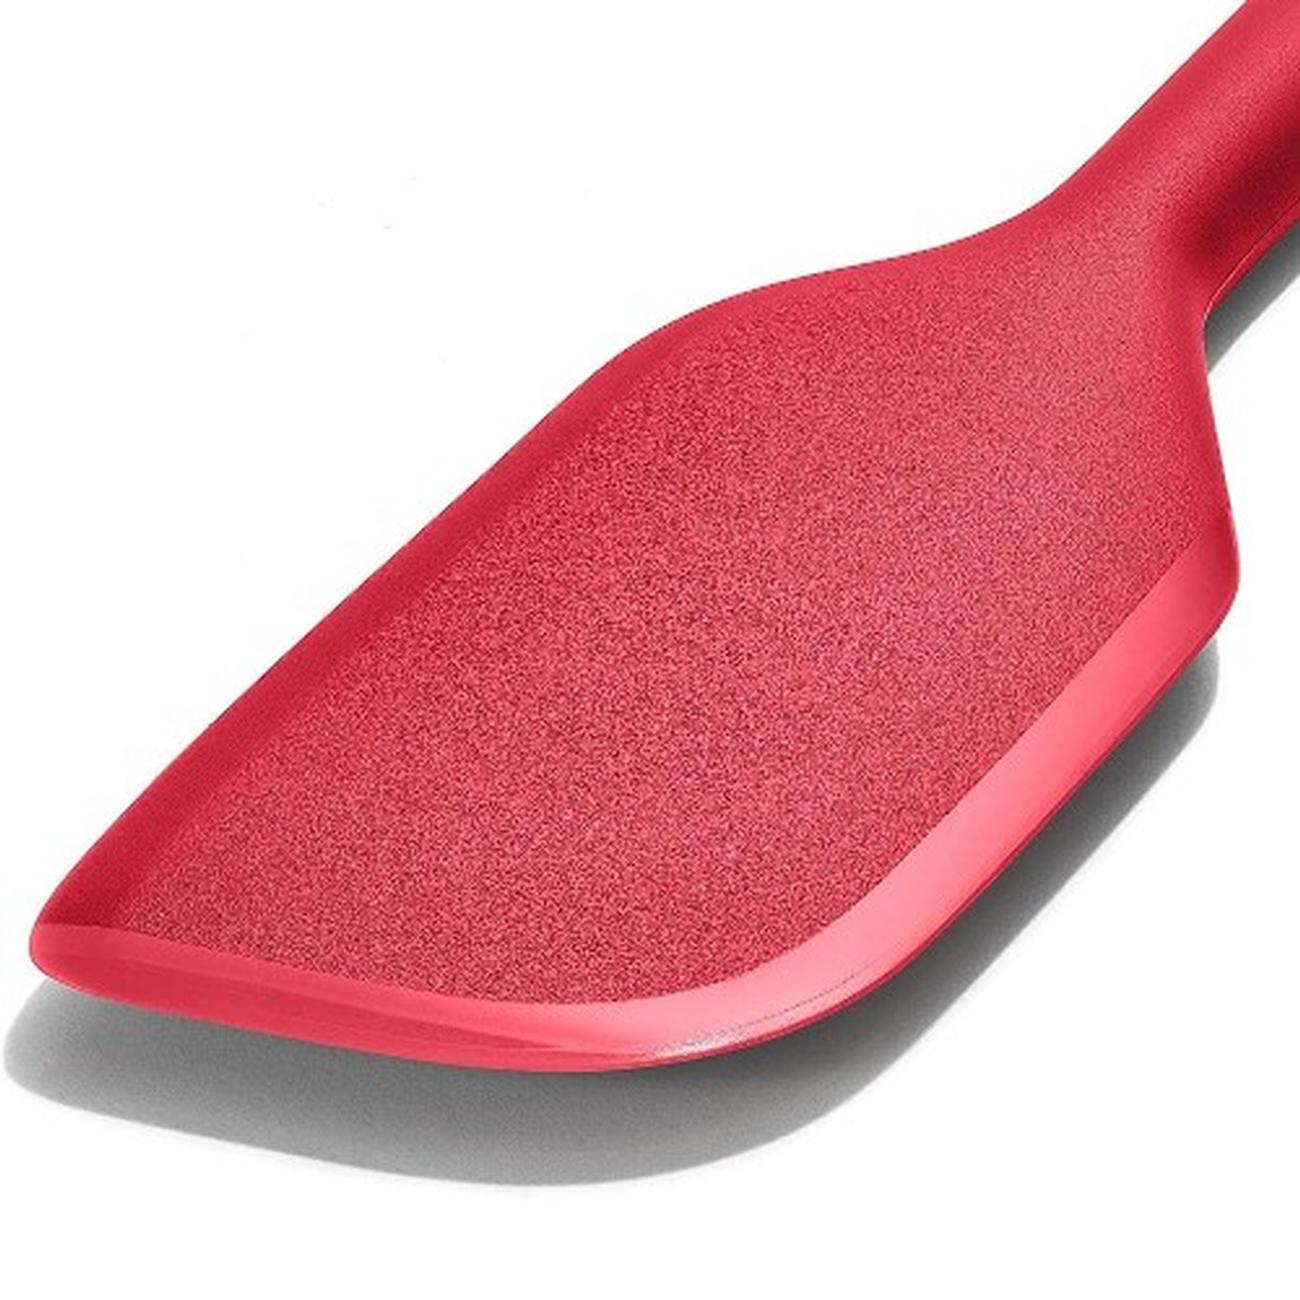 https://www.thekitchenwhisk.ie/contentfiles/productImages/Large/Good-Grips-Silicone-Everyday-Spatula-Jam-OXO-flexible.jpg